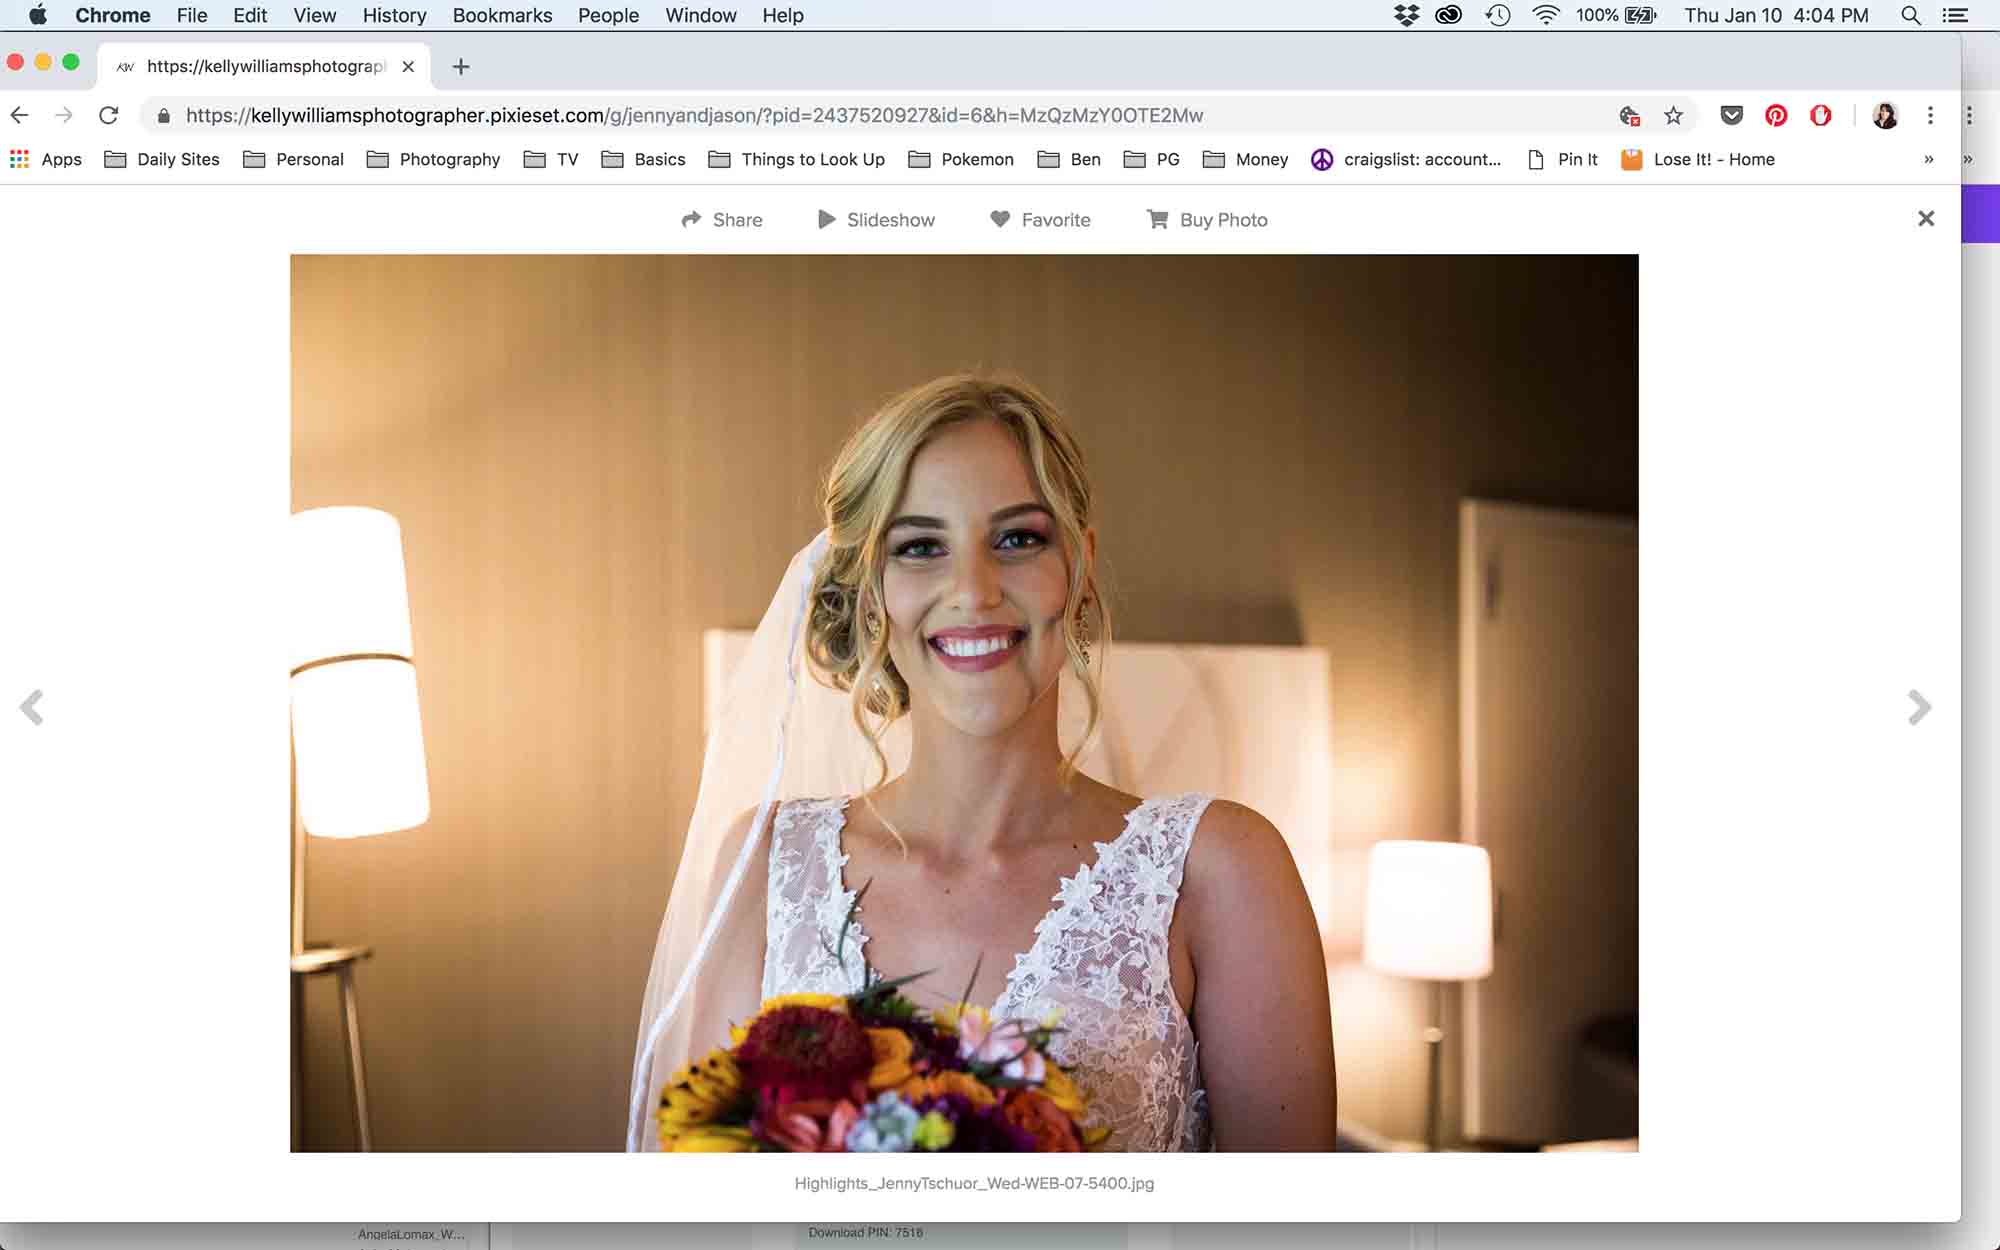 Screenshots of client online photo gallery for an article on how to use your online photo gallery